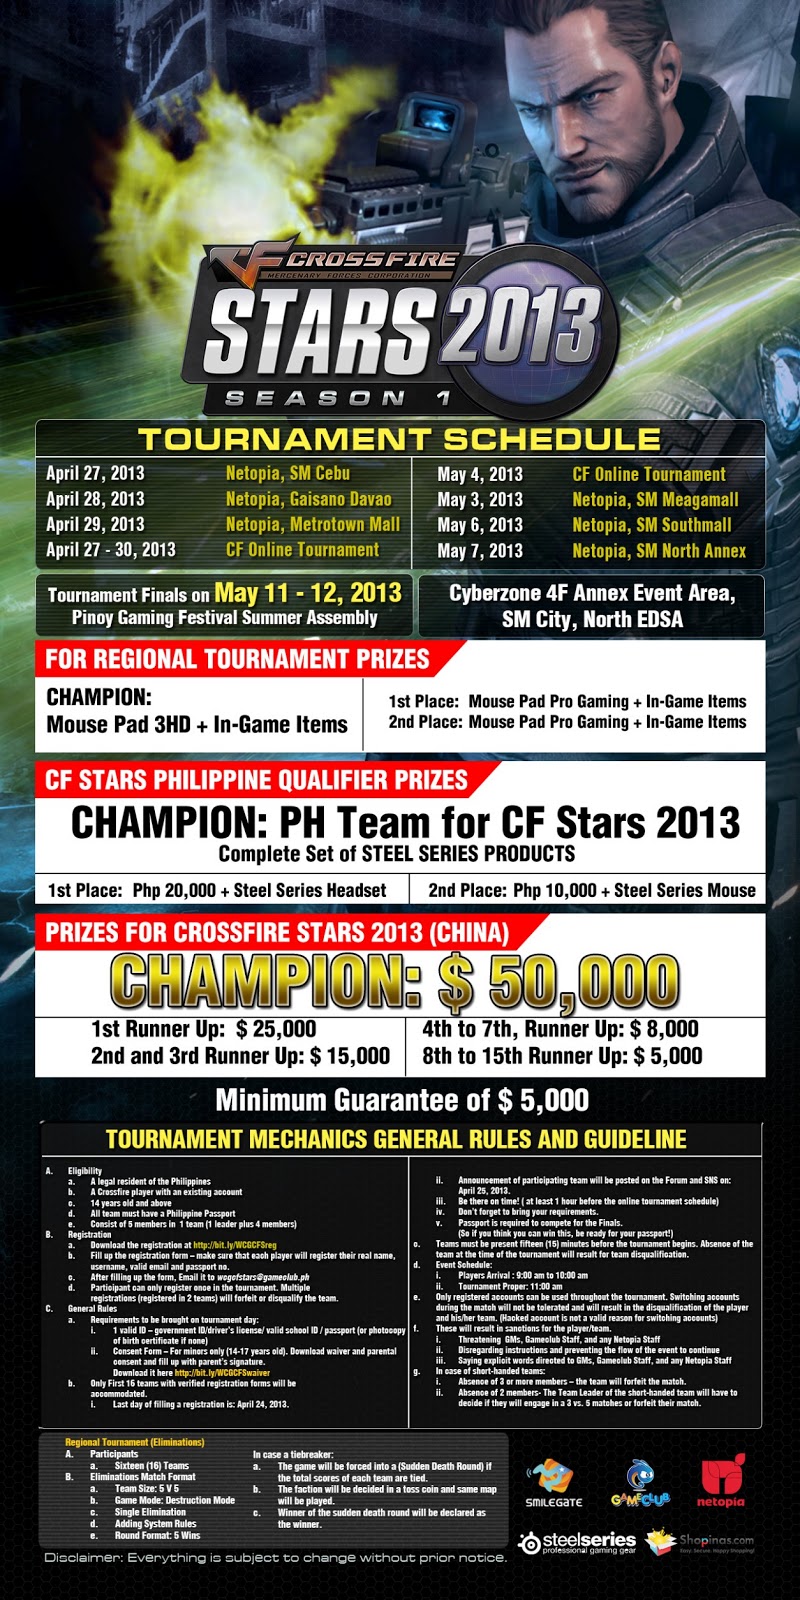 Crossfire Launches Biggest Tournament Ever!